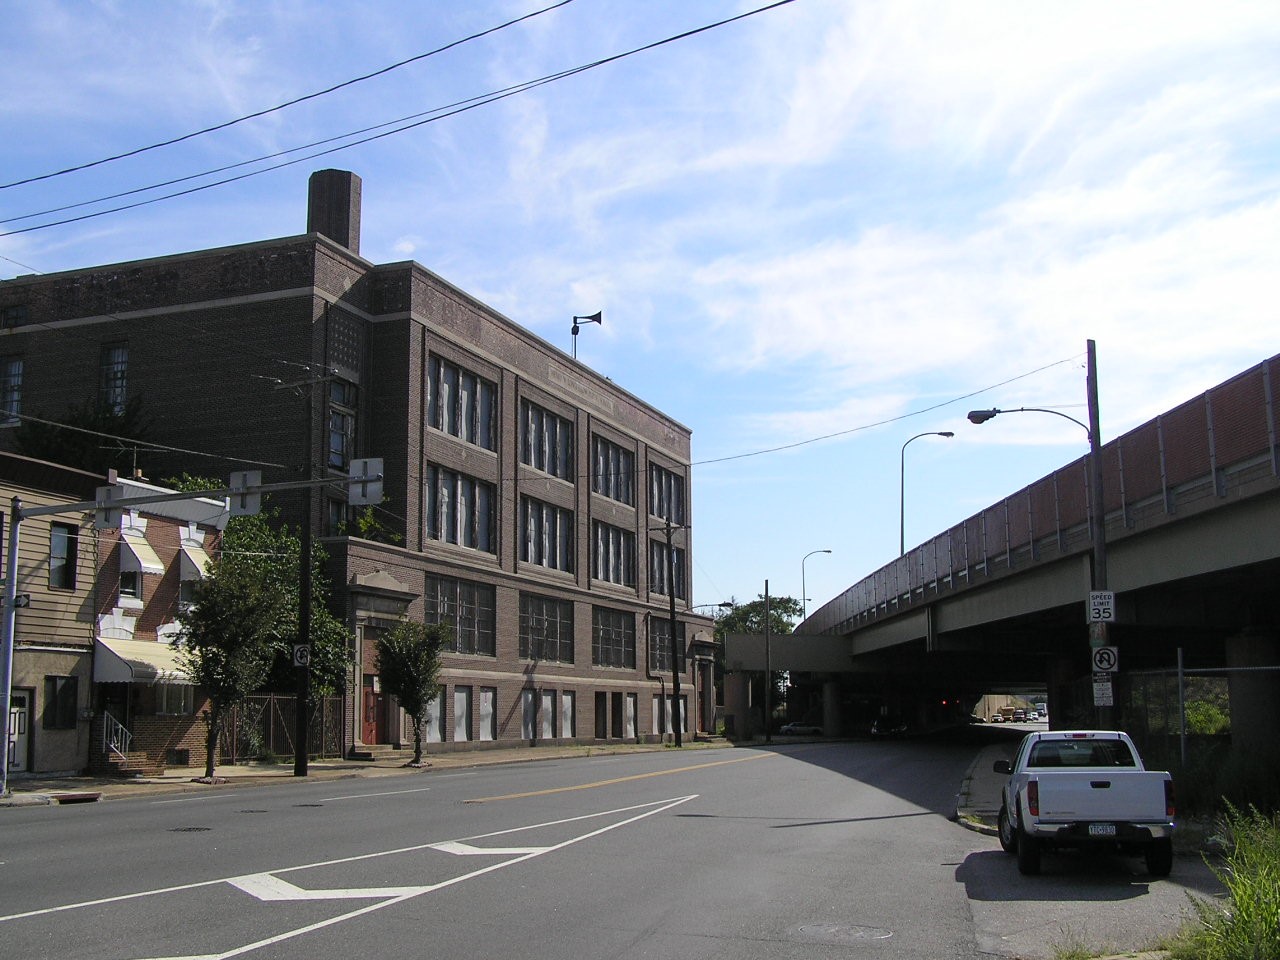 A photograph of a street view with a multi-story brick building right next to an elevated highway.